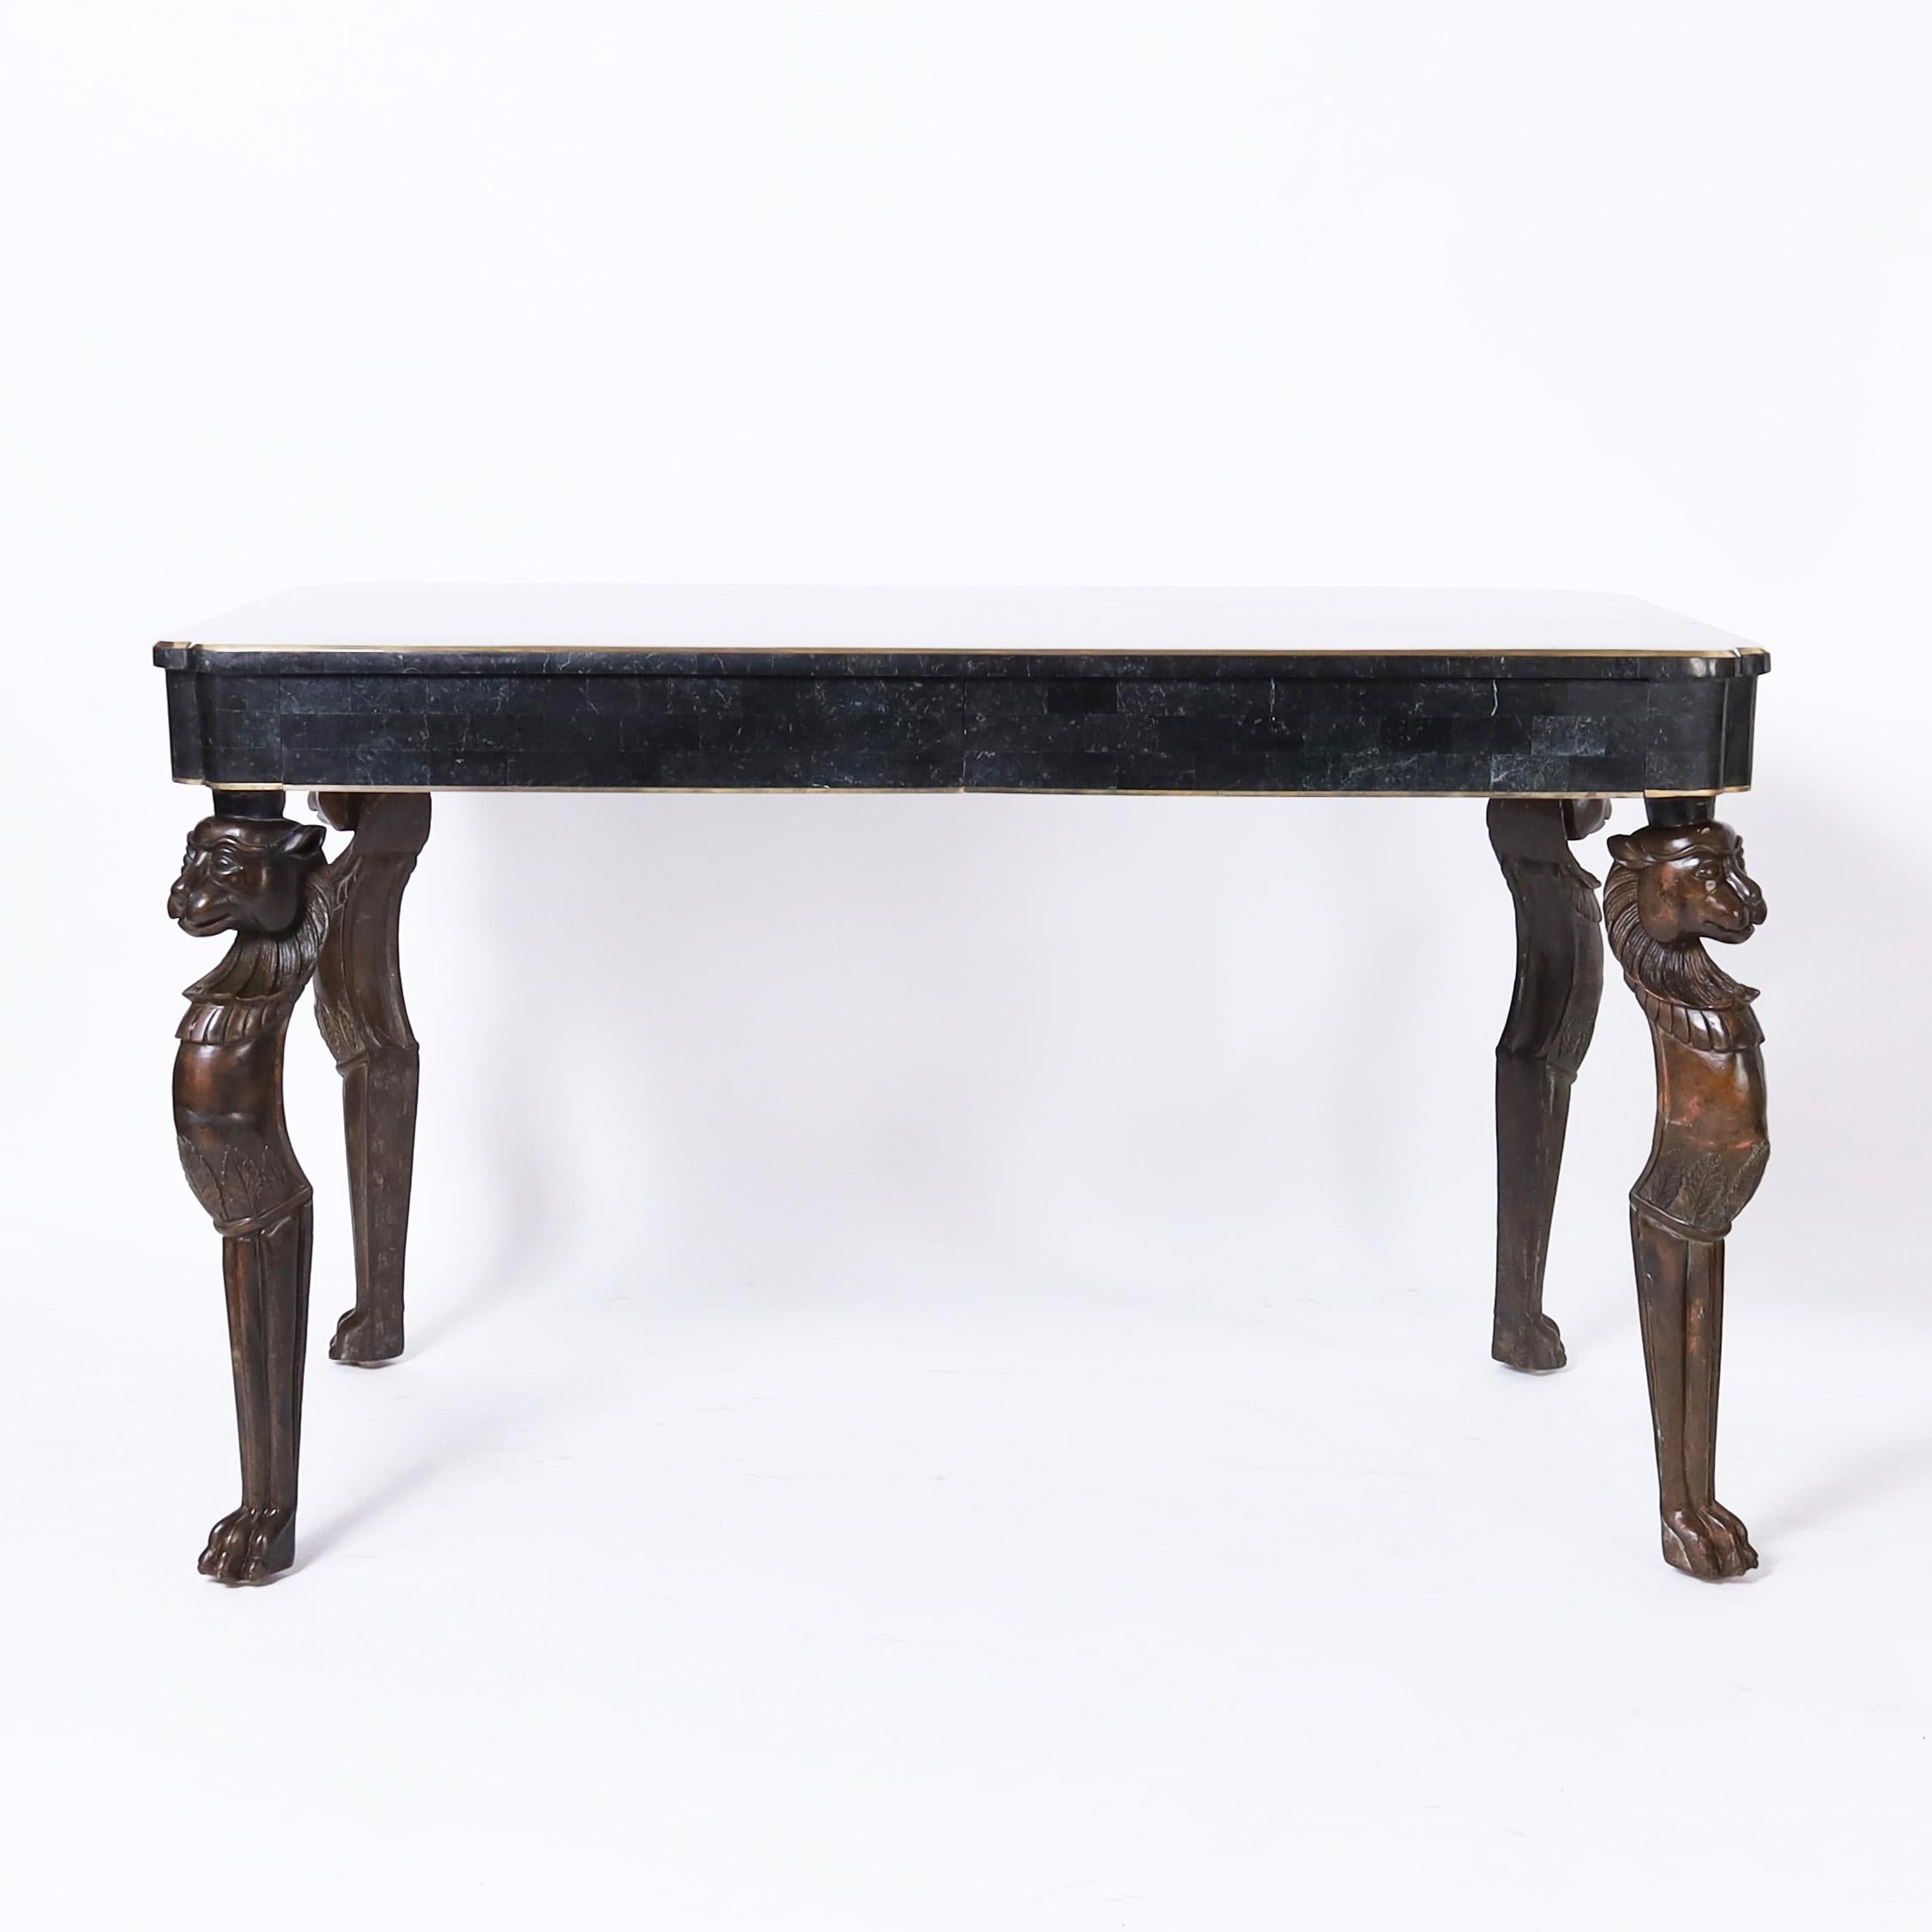 Standout mid century writing desk having a tessellated marble top on a case with two drawers and brass borders over four dramatic bronze Egyptian style cat legs. Signed Maitland-Smith in a drawer.